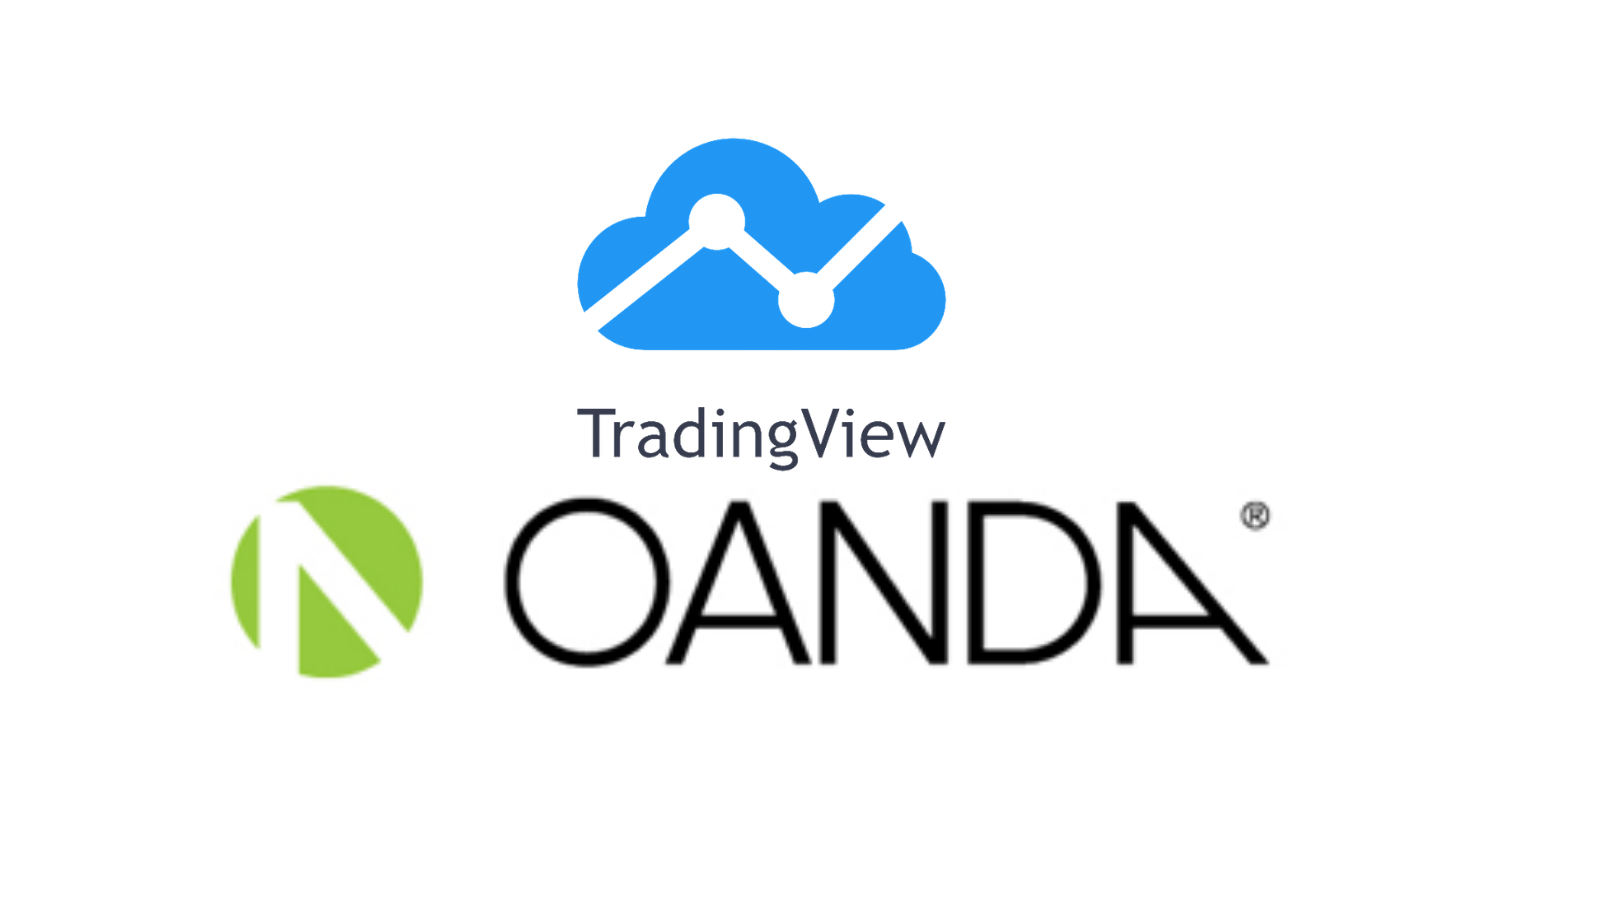 OANDA Launches TradingView Partnership in UK and Europe